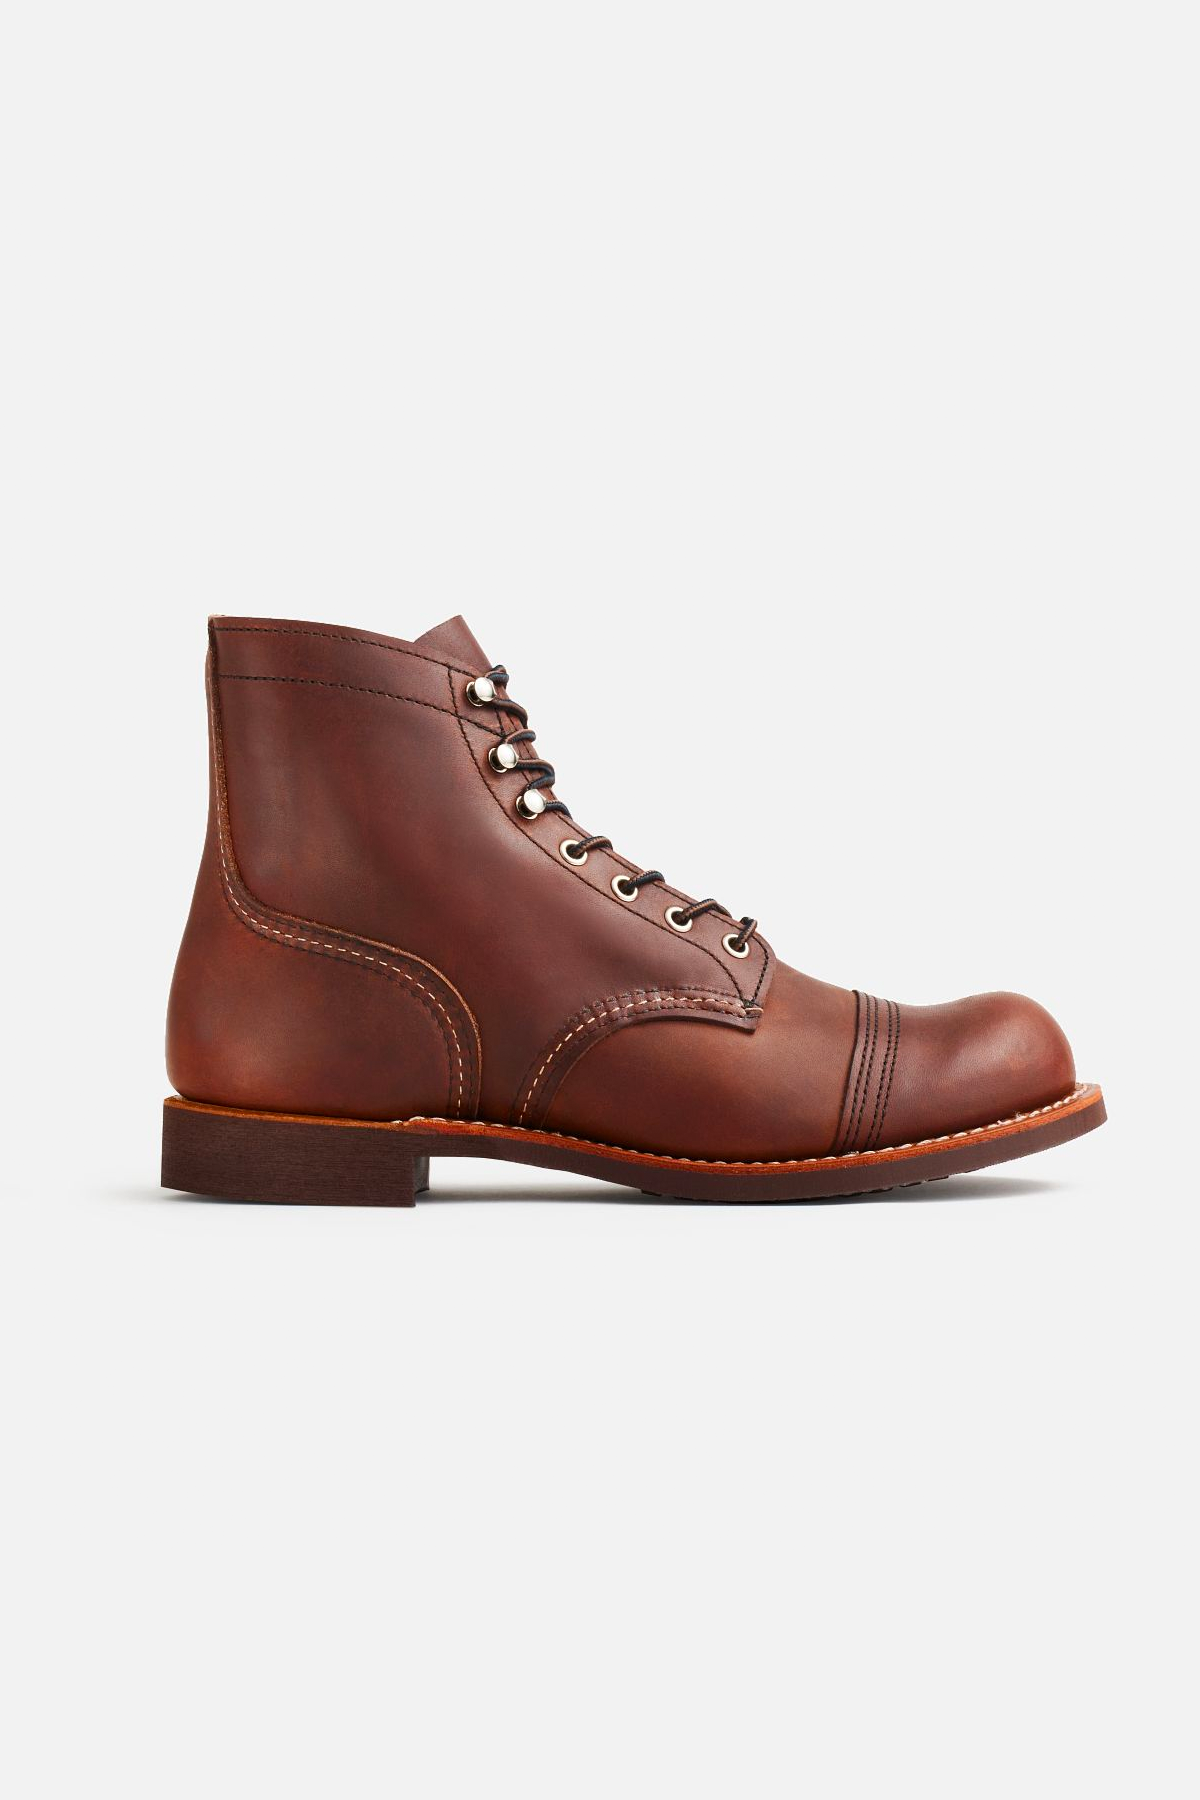 Men's Red Wing Heritage Iron Ranger in Amber Harness